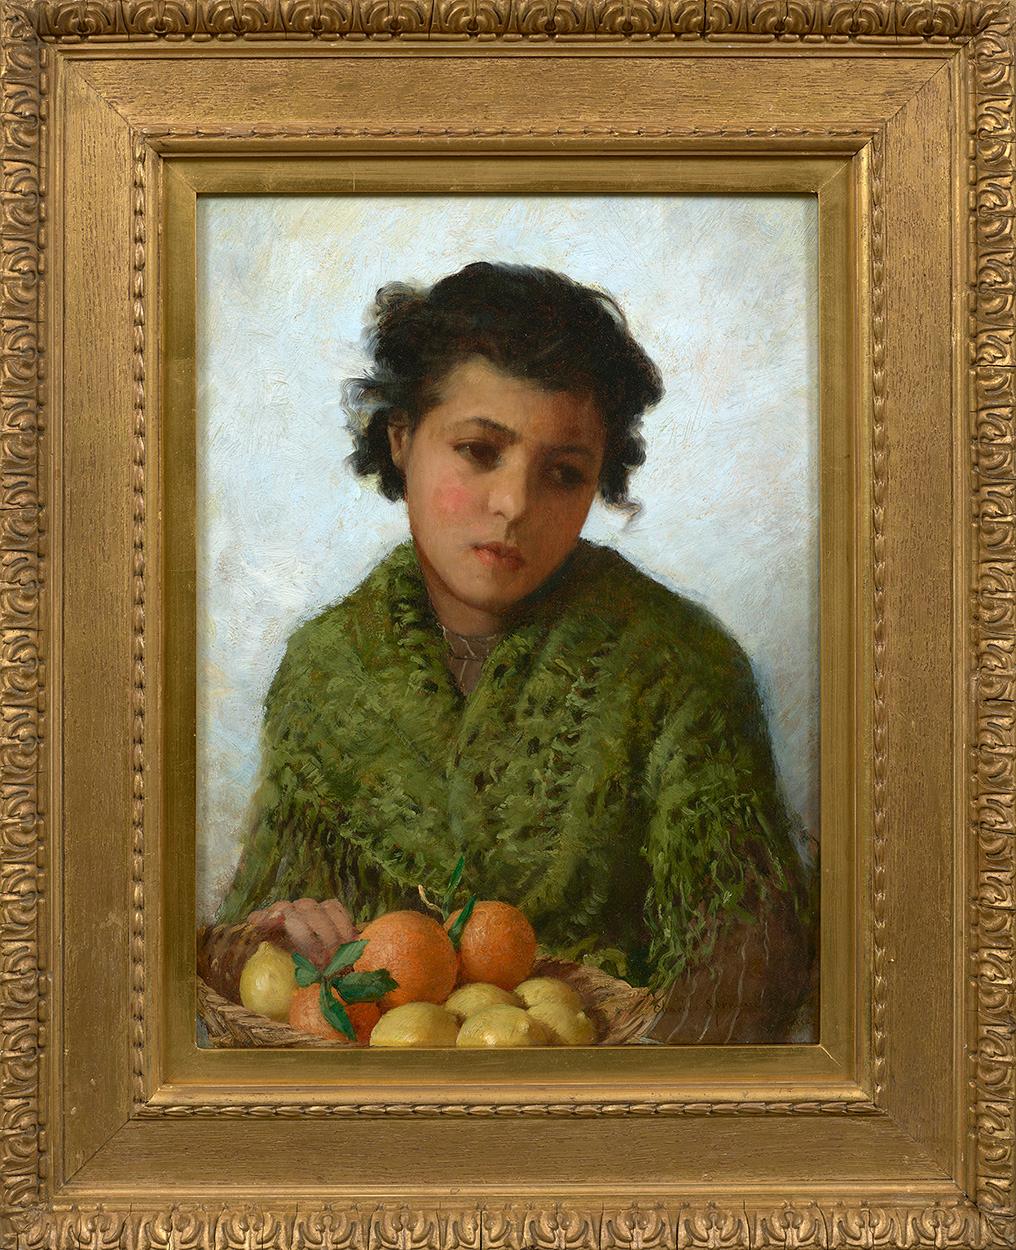 Young Girl Selling Oranges and Lemons - Painting by Charles Sprague Pearce